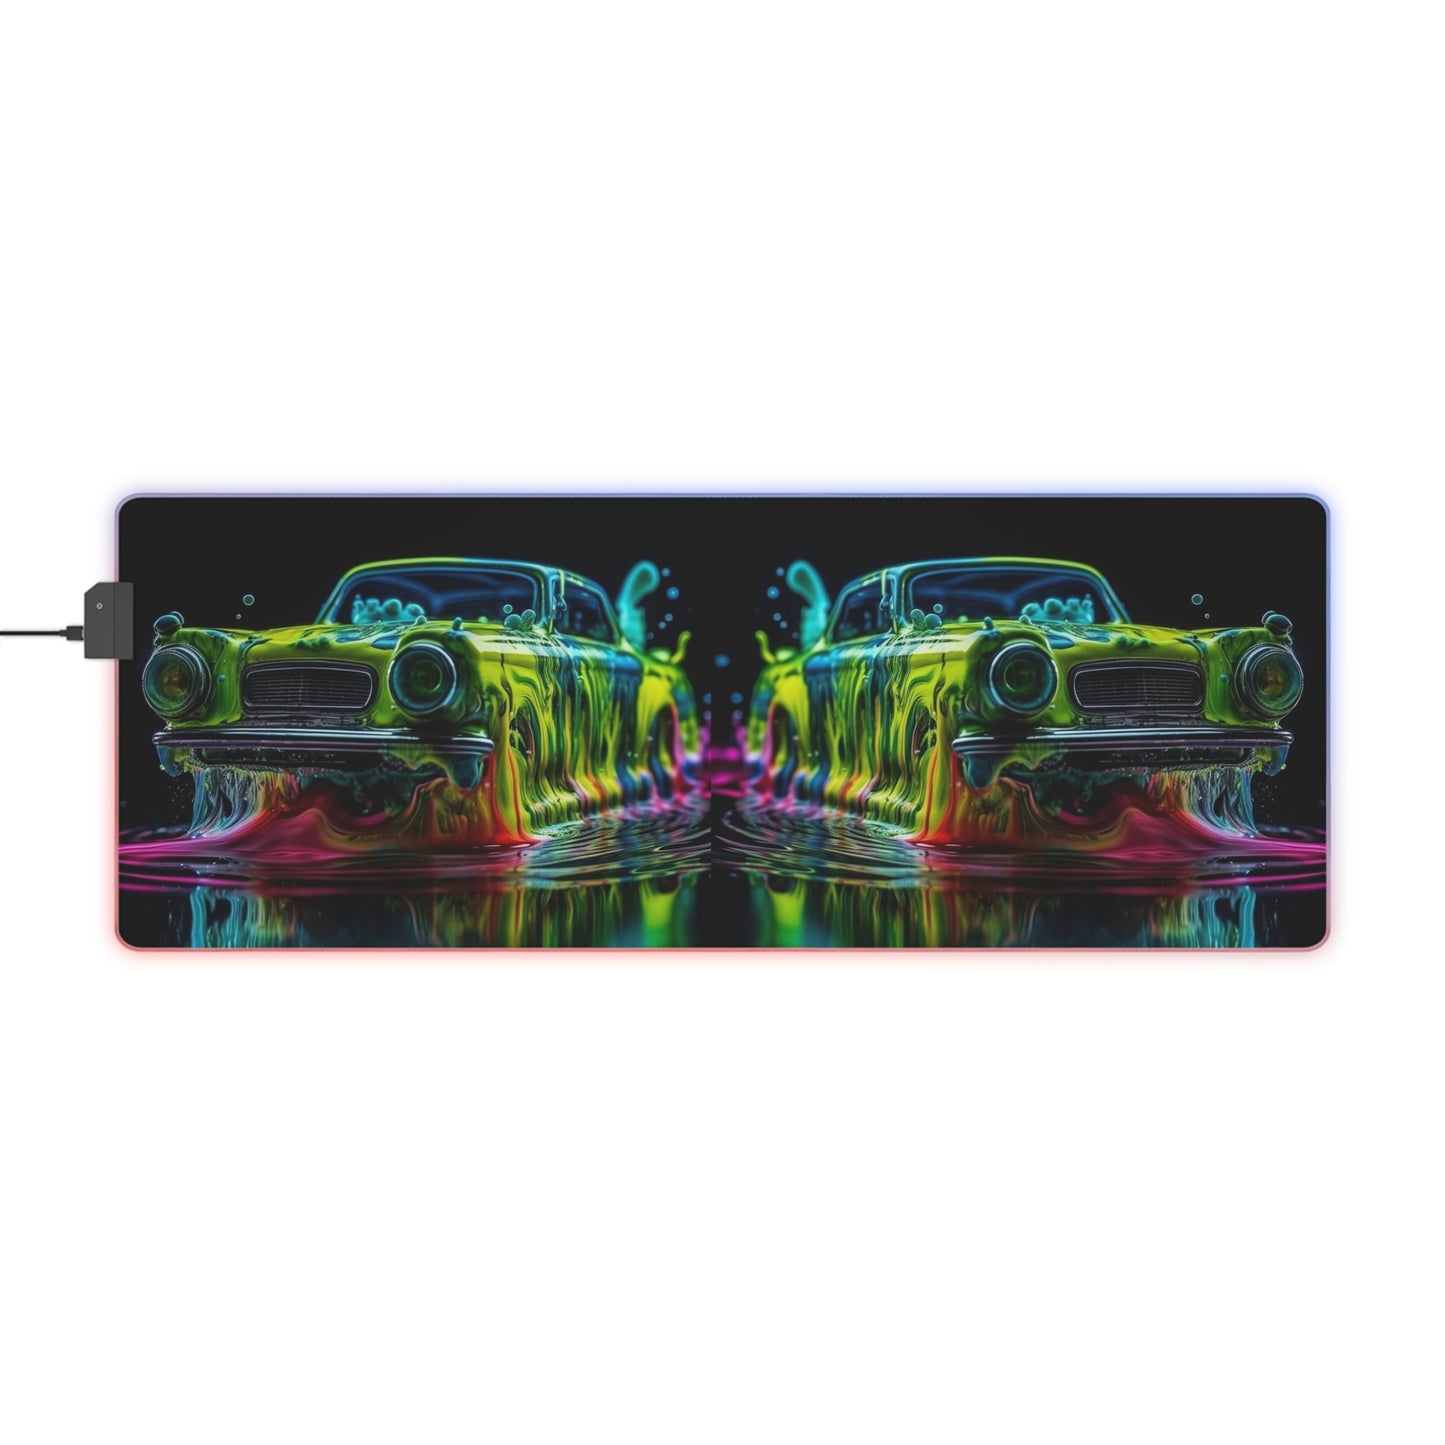 LED Gaming Mouse Pad Hotrod Water 3